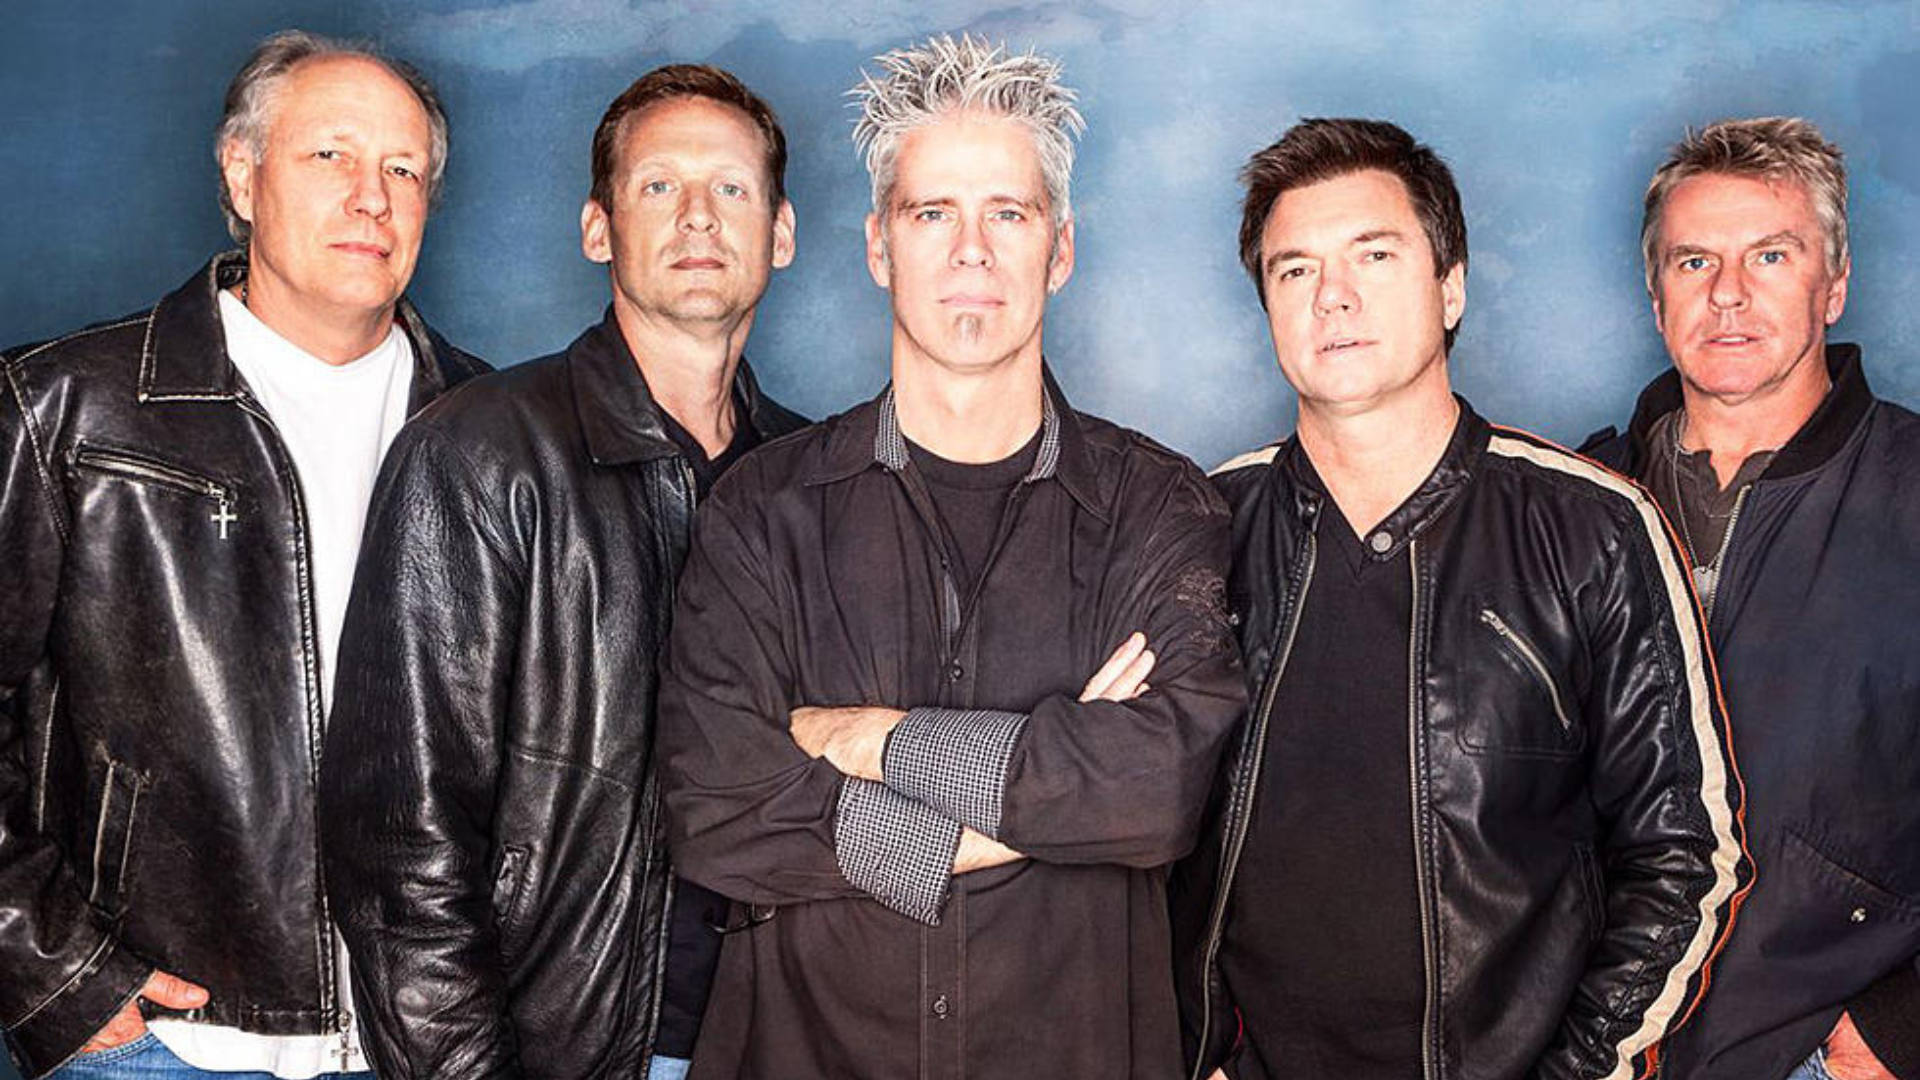 book the Little River Band